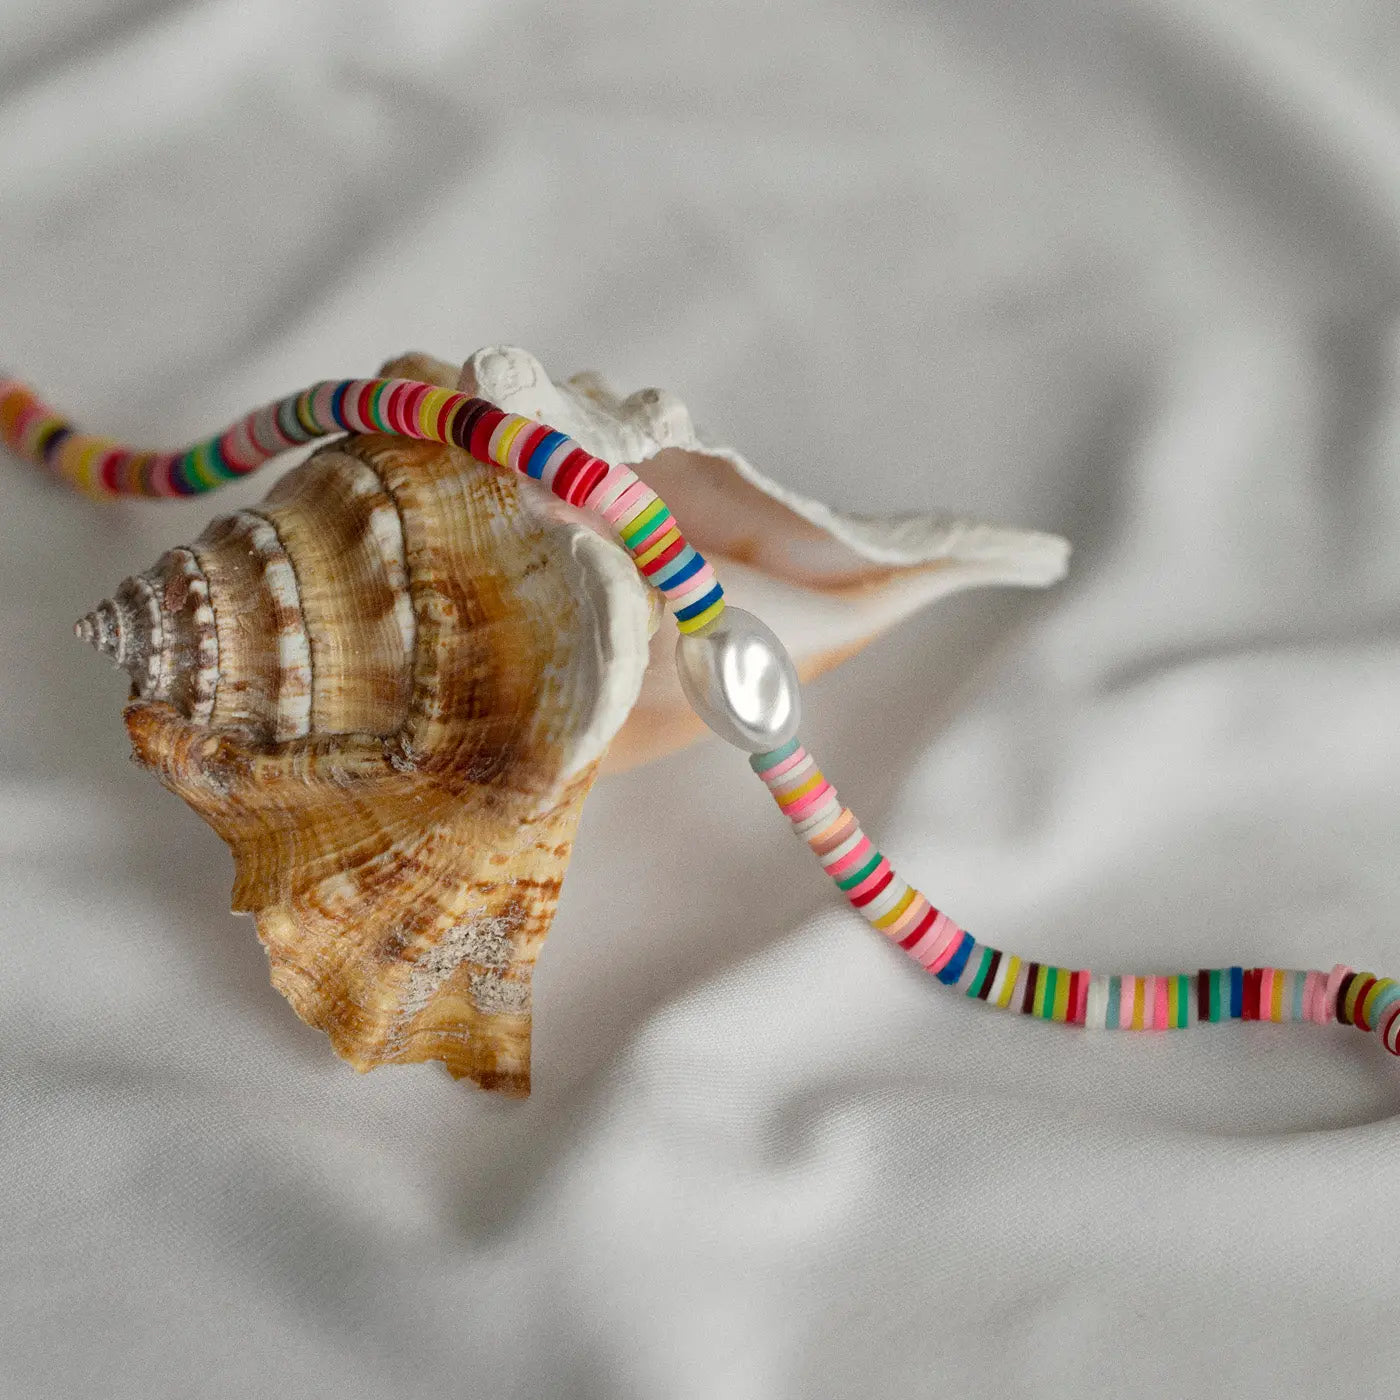 Colorful Bead Necklace with Pearl